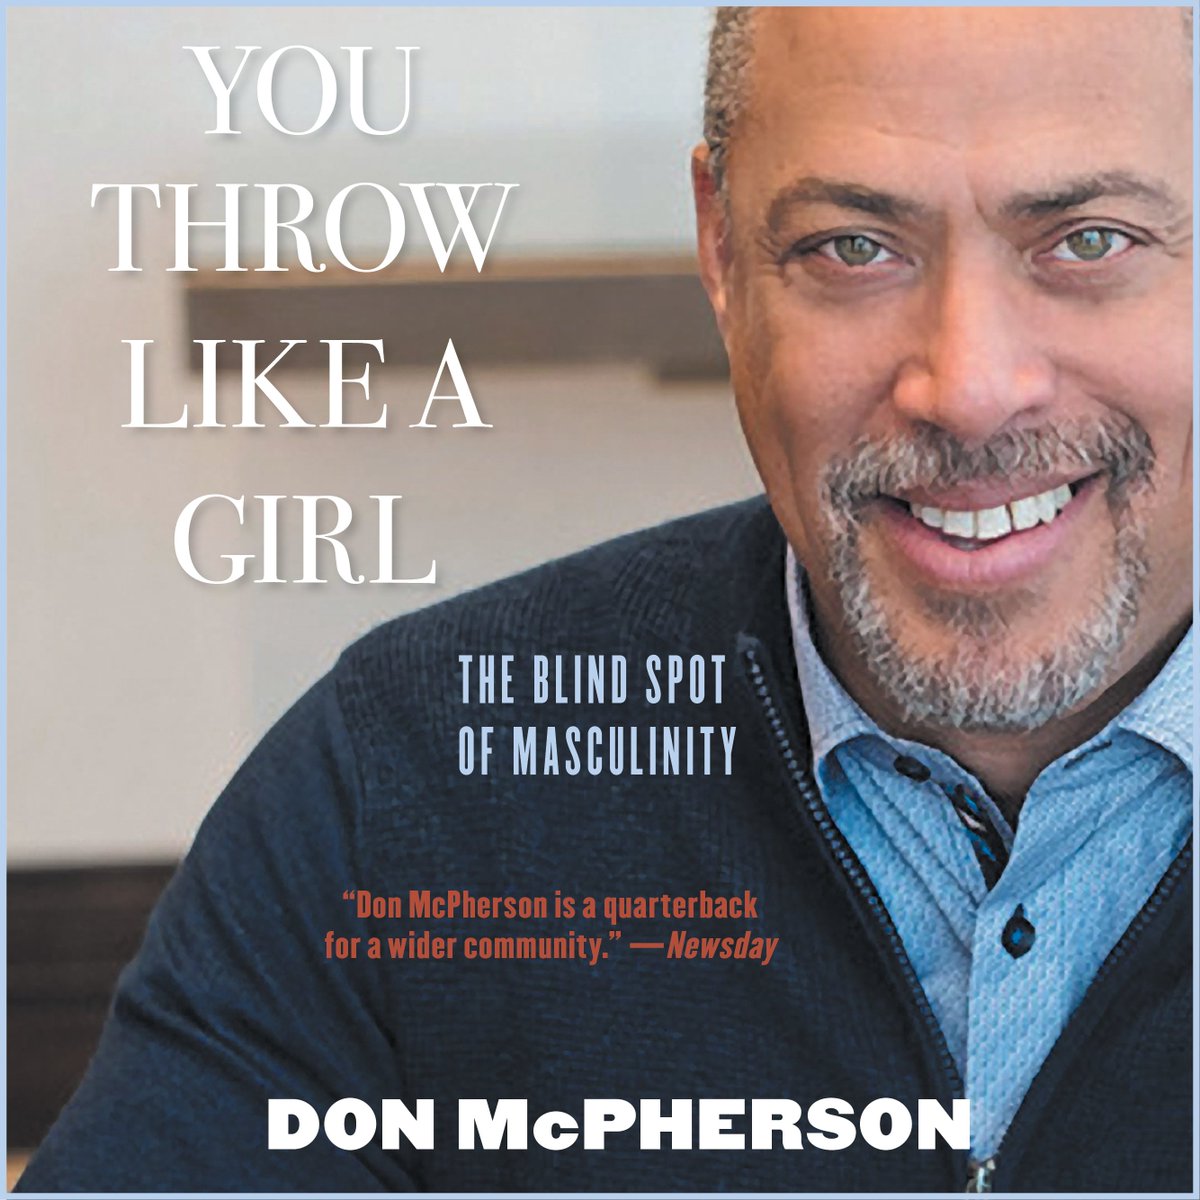 Cover of book You Throw LIke a Girl: The Blind Side of Masculnity with pciture of authro Don MsPherson, African AMerican man with beared wearing blue shirt and darker blue sweater